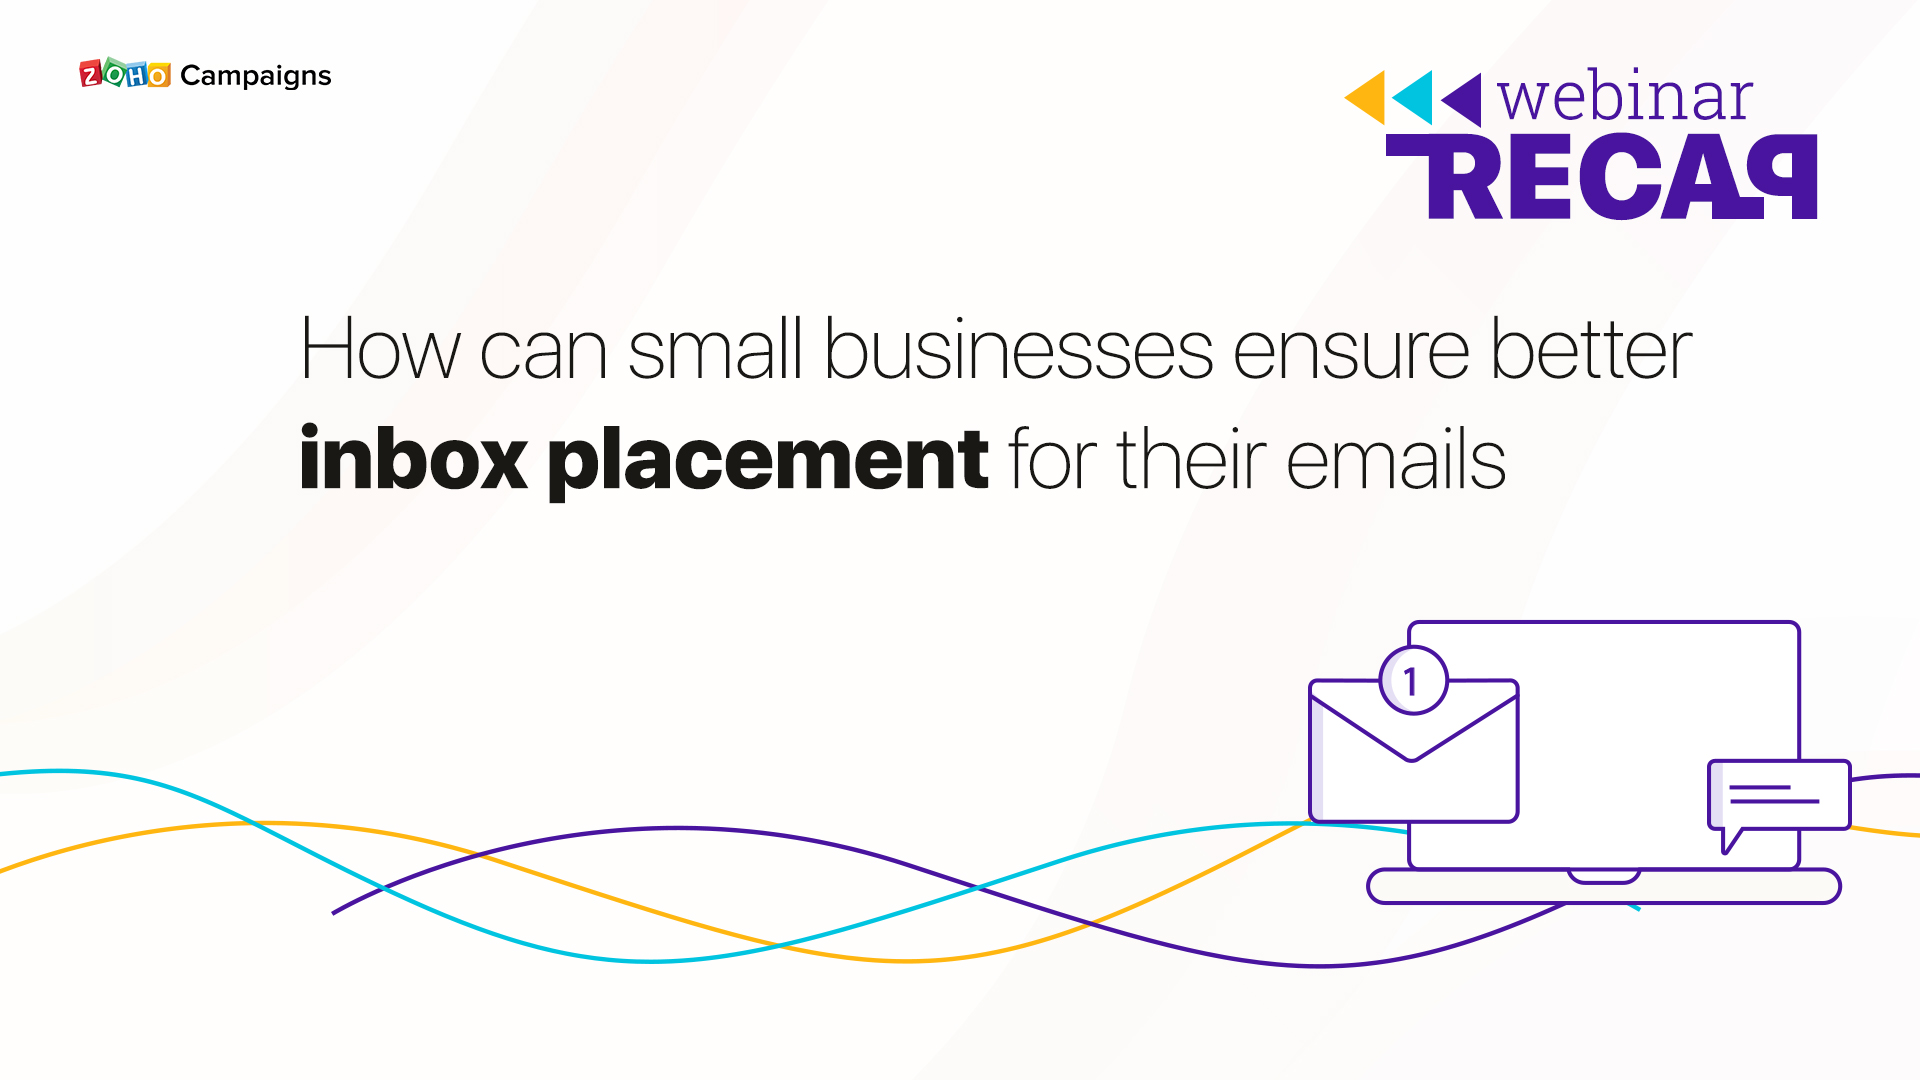 Inbox placement through the lens of a marketer